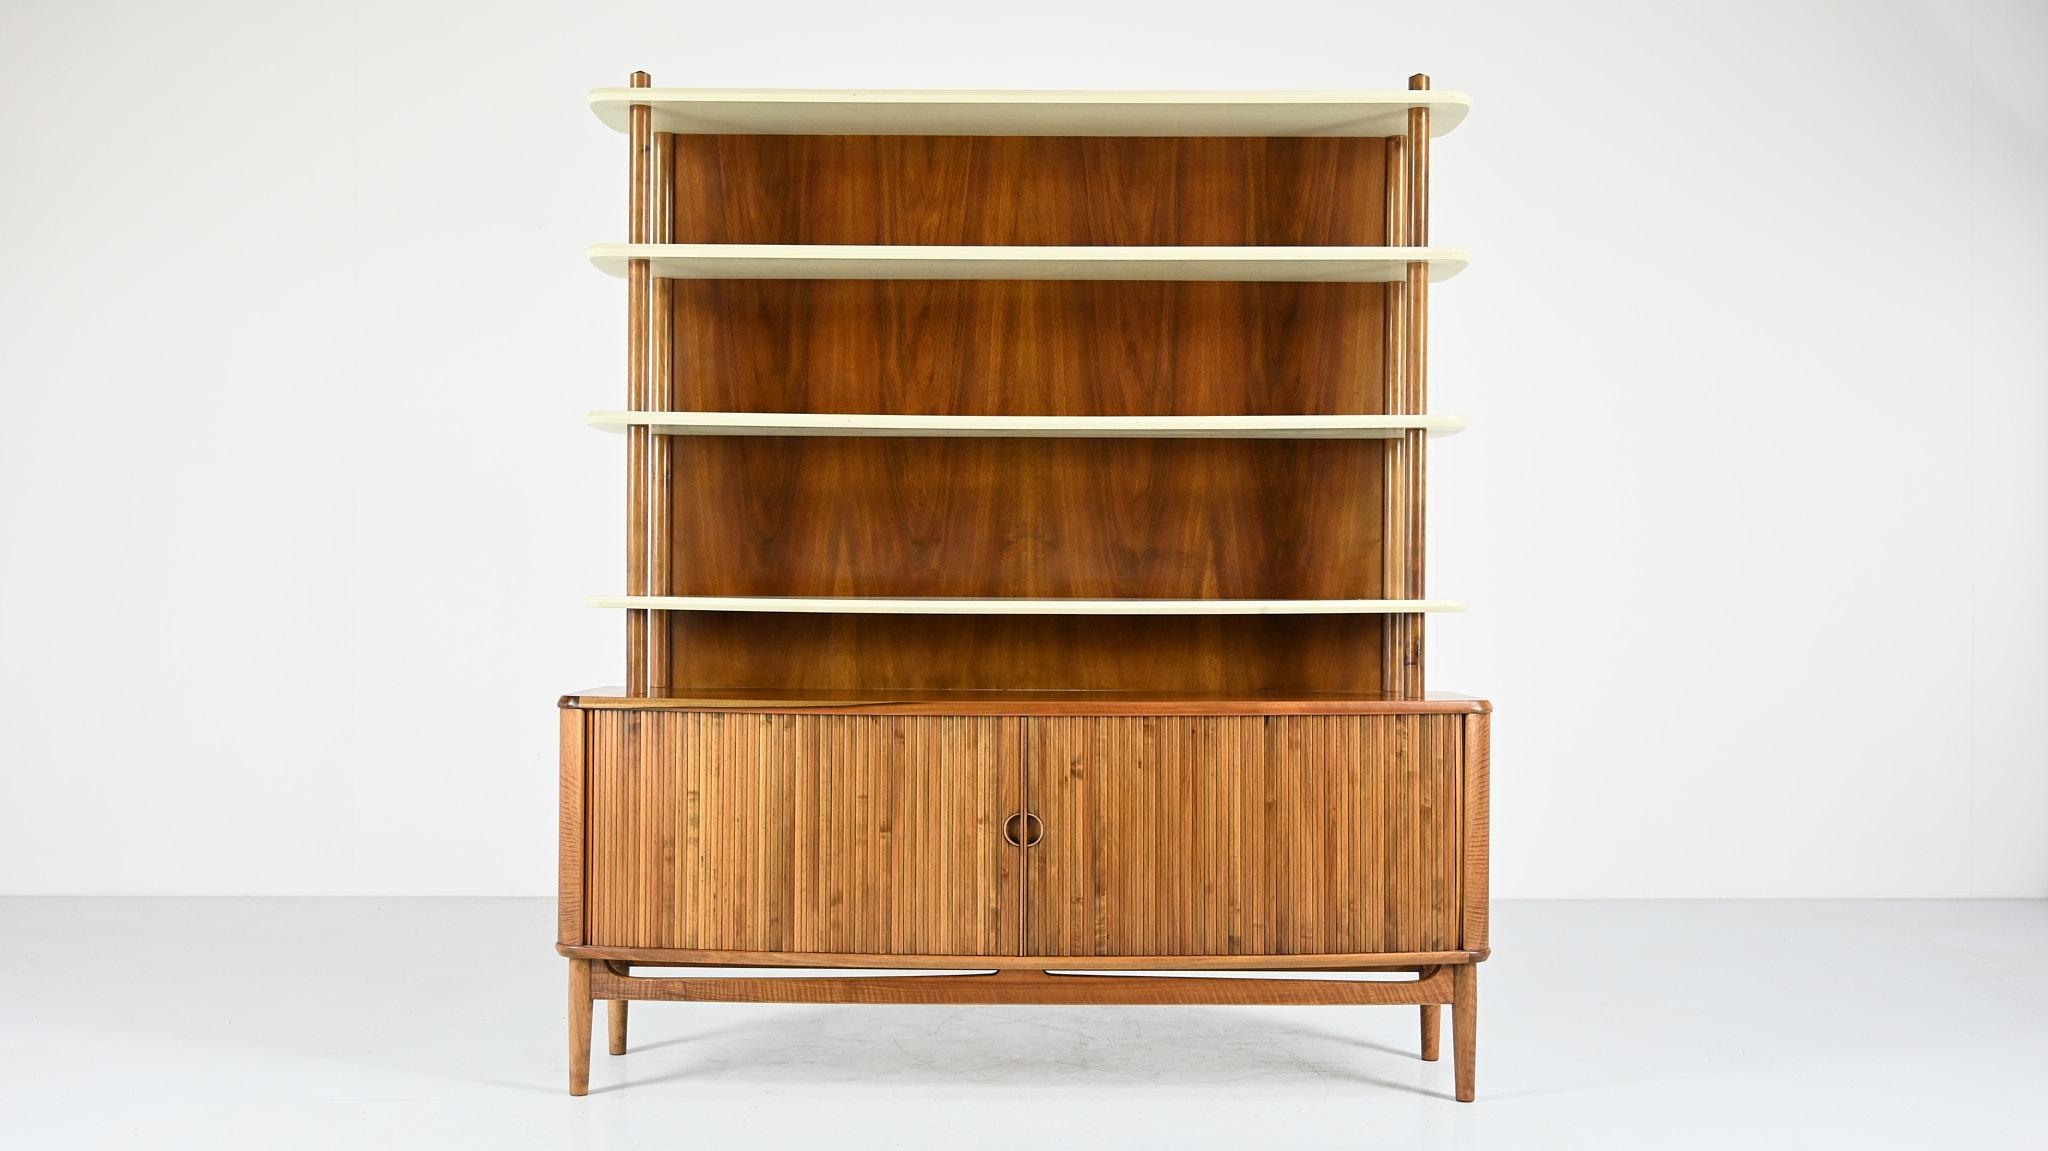 Designed by Kurt Olsen for A. Andersen & Bohm, this rare cabinet features a lower section opening by tambour doors revealing shelves and drawers, supporting an upper section of white lacquered shelves. Walnut and walnut veneer, upper shelves in